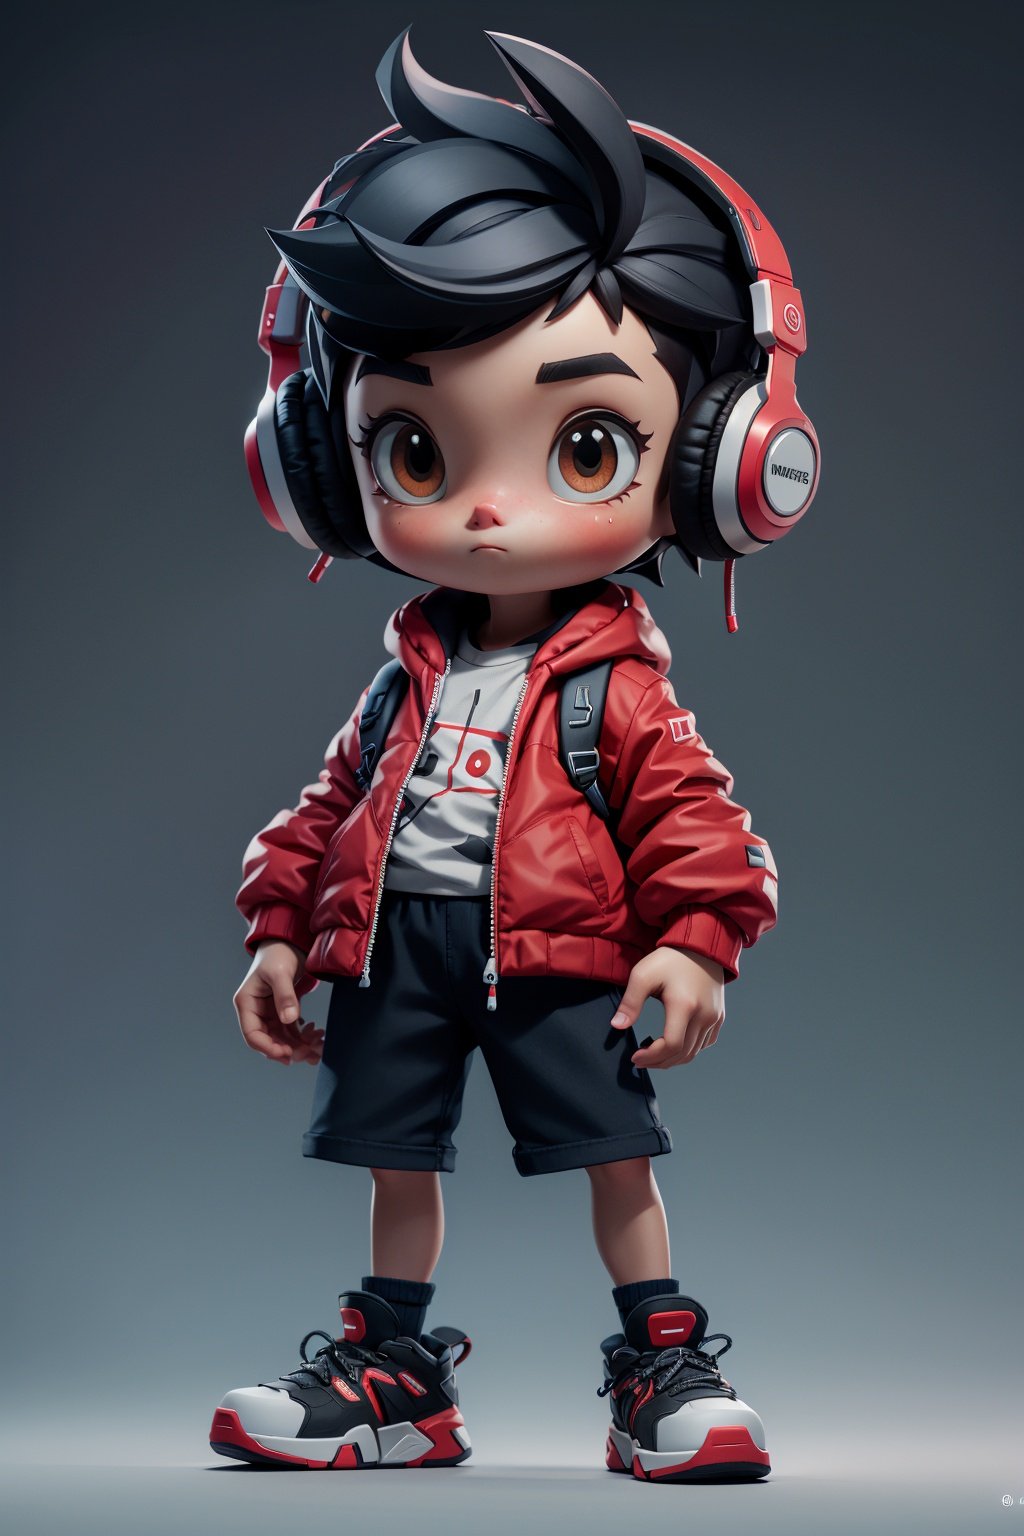 masterpiece, best quality, 8k, official art, cinematic light, ultra high res, 1boy, child, red jacket, shorts, black hair, headphones, backpack, standing, full body